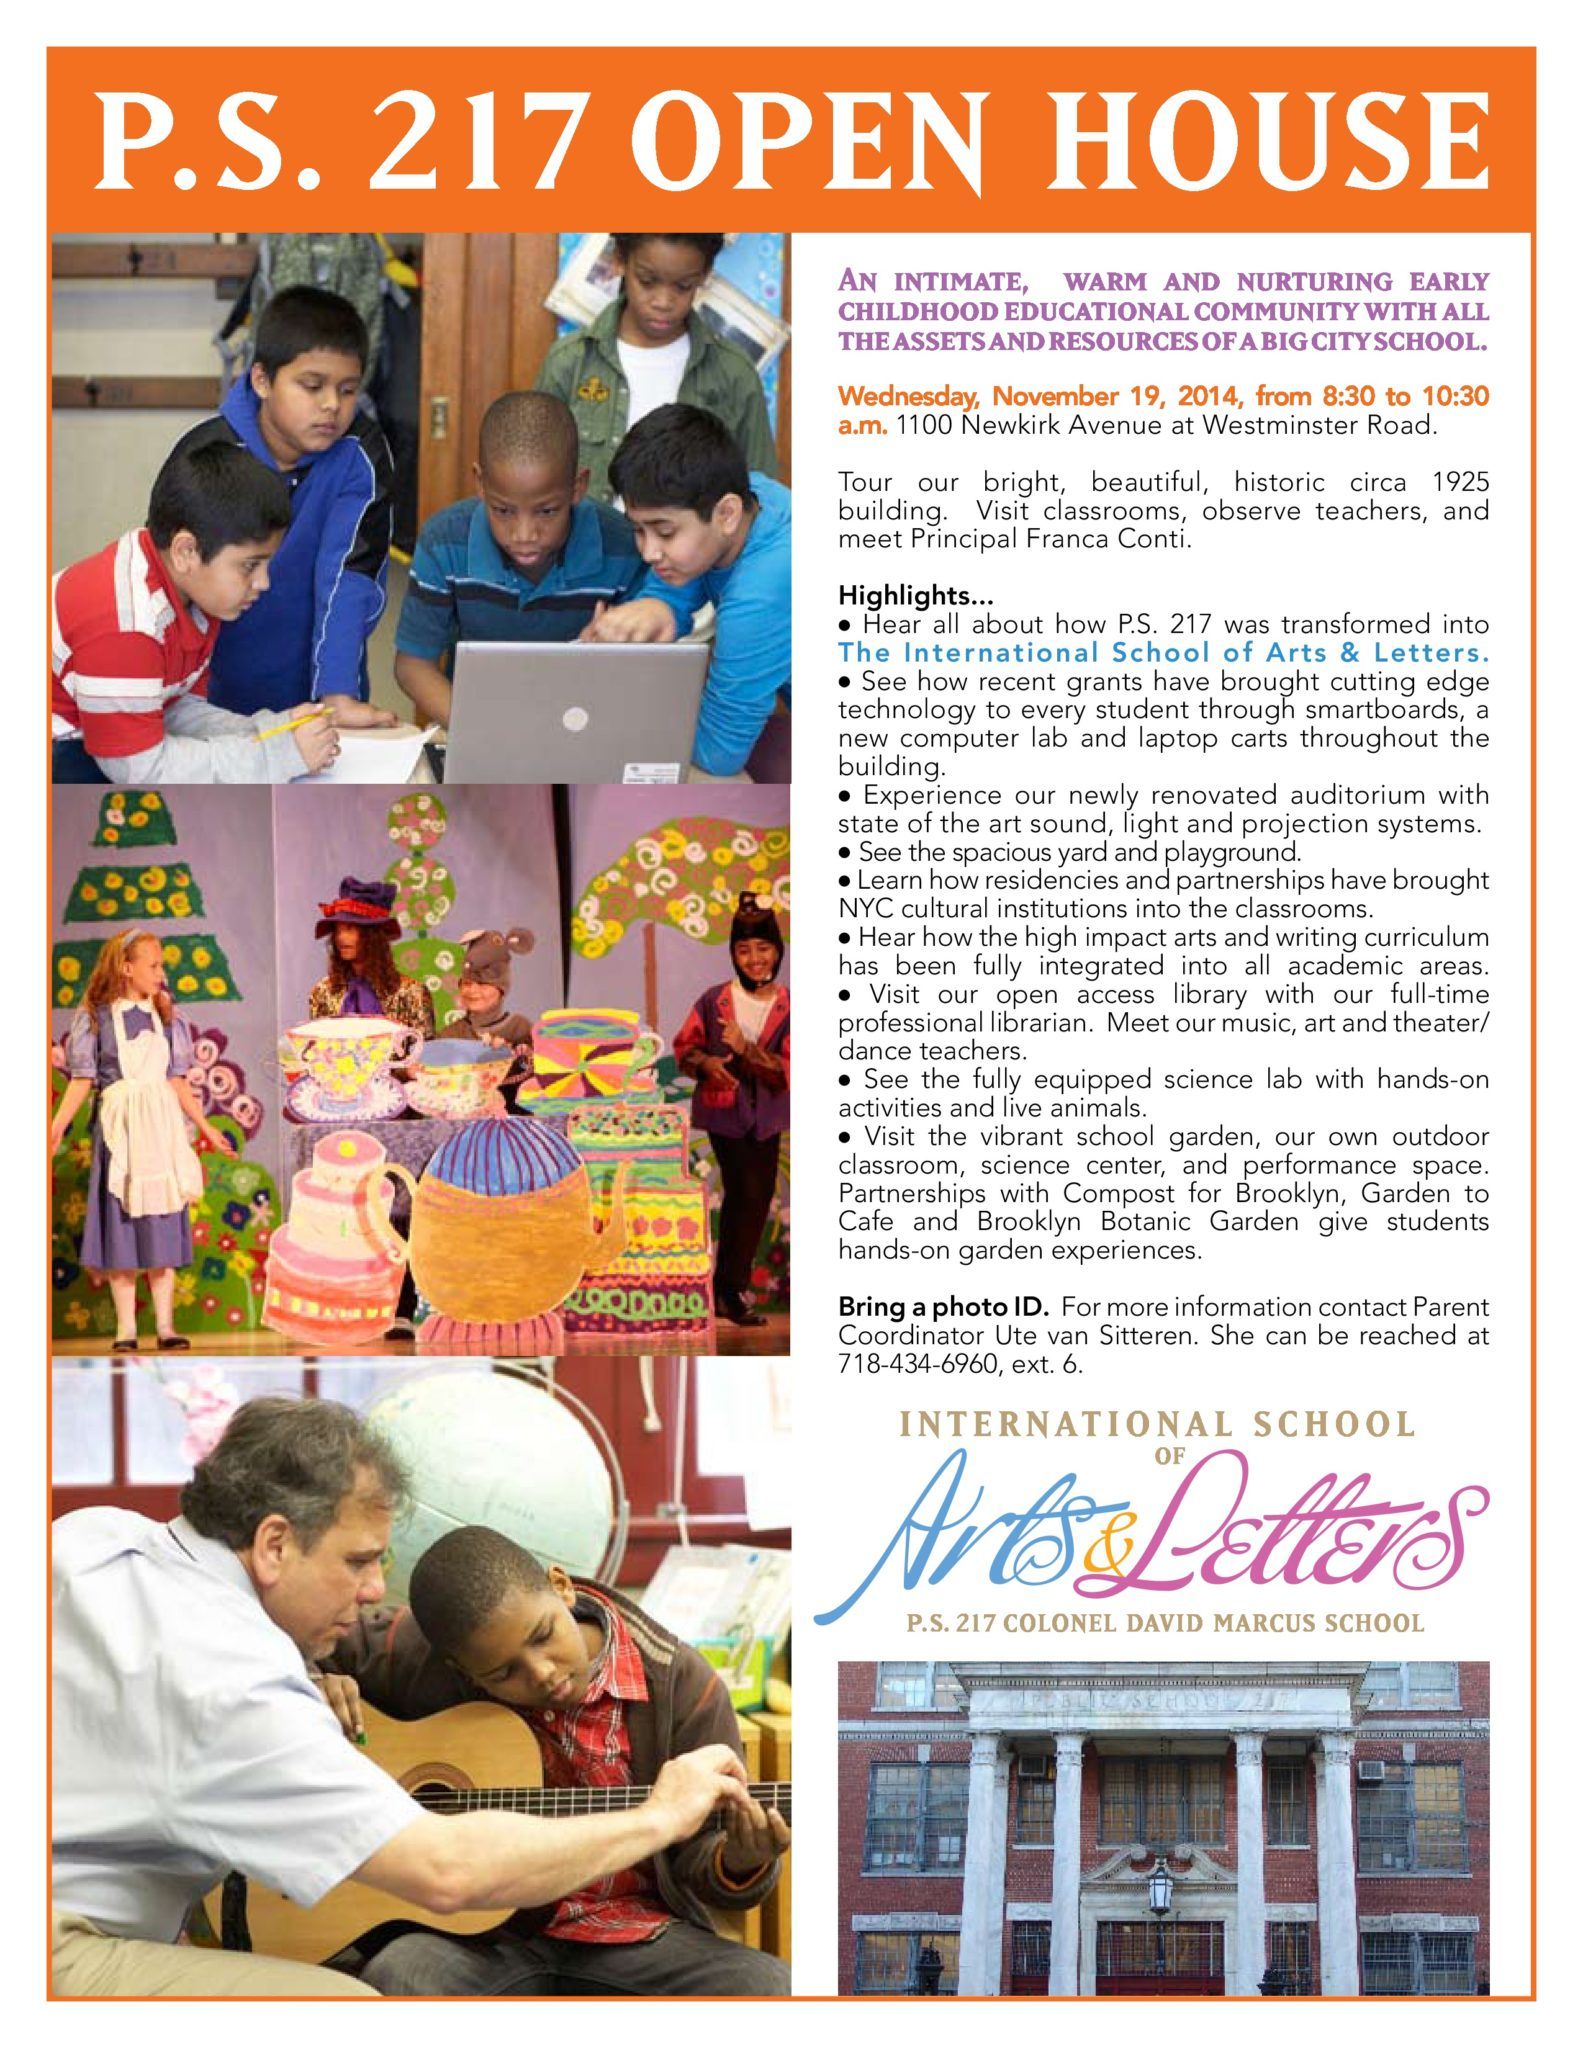 Learn About PS 217 At Its Open House On Wednesday, November 19